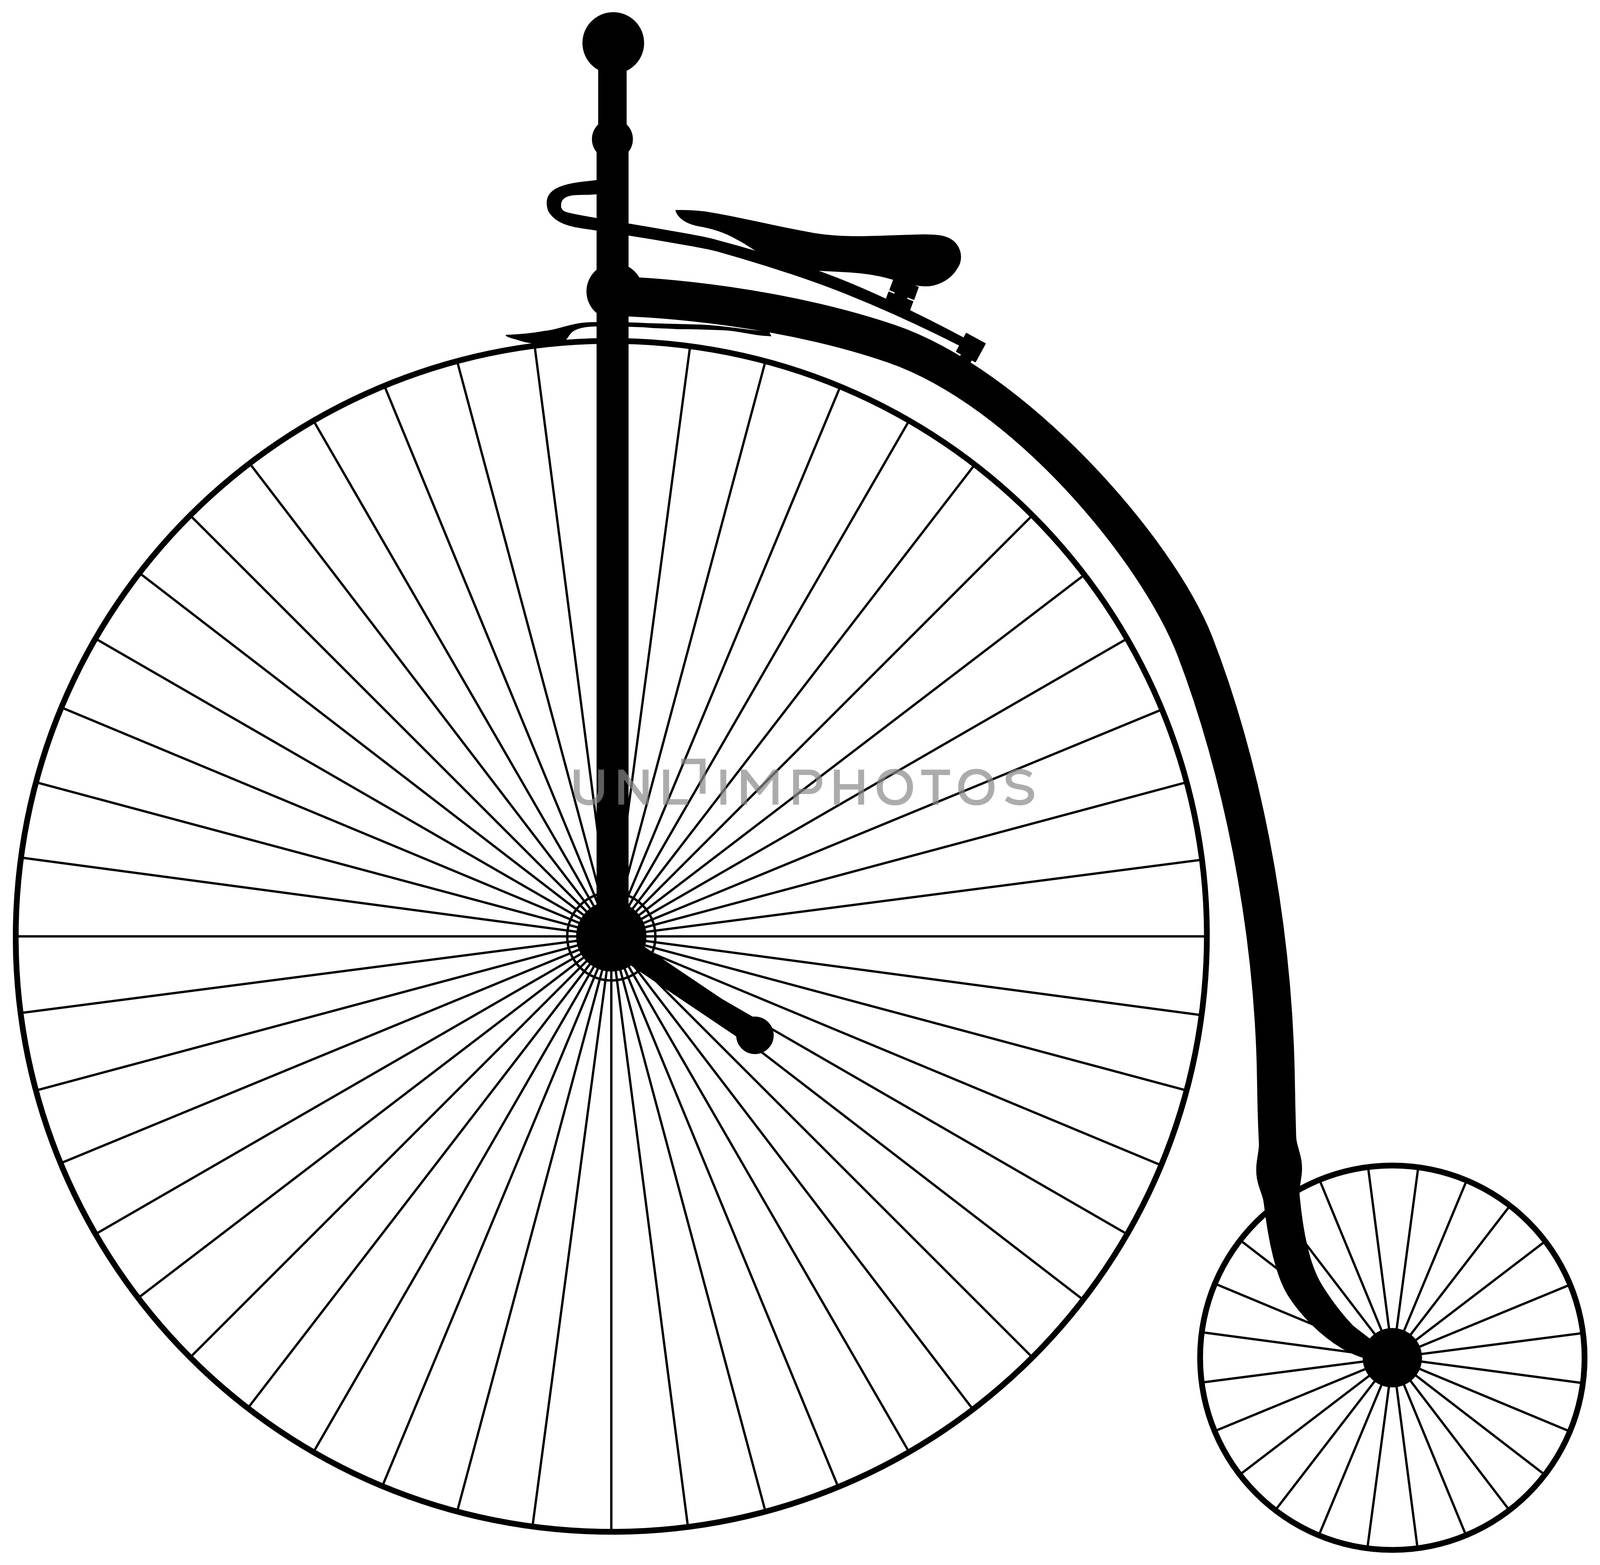 Penny Farthing Bicycle by darrenwhittingham